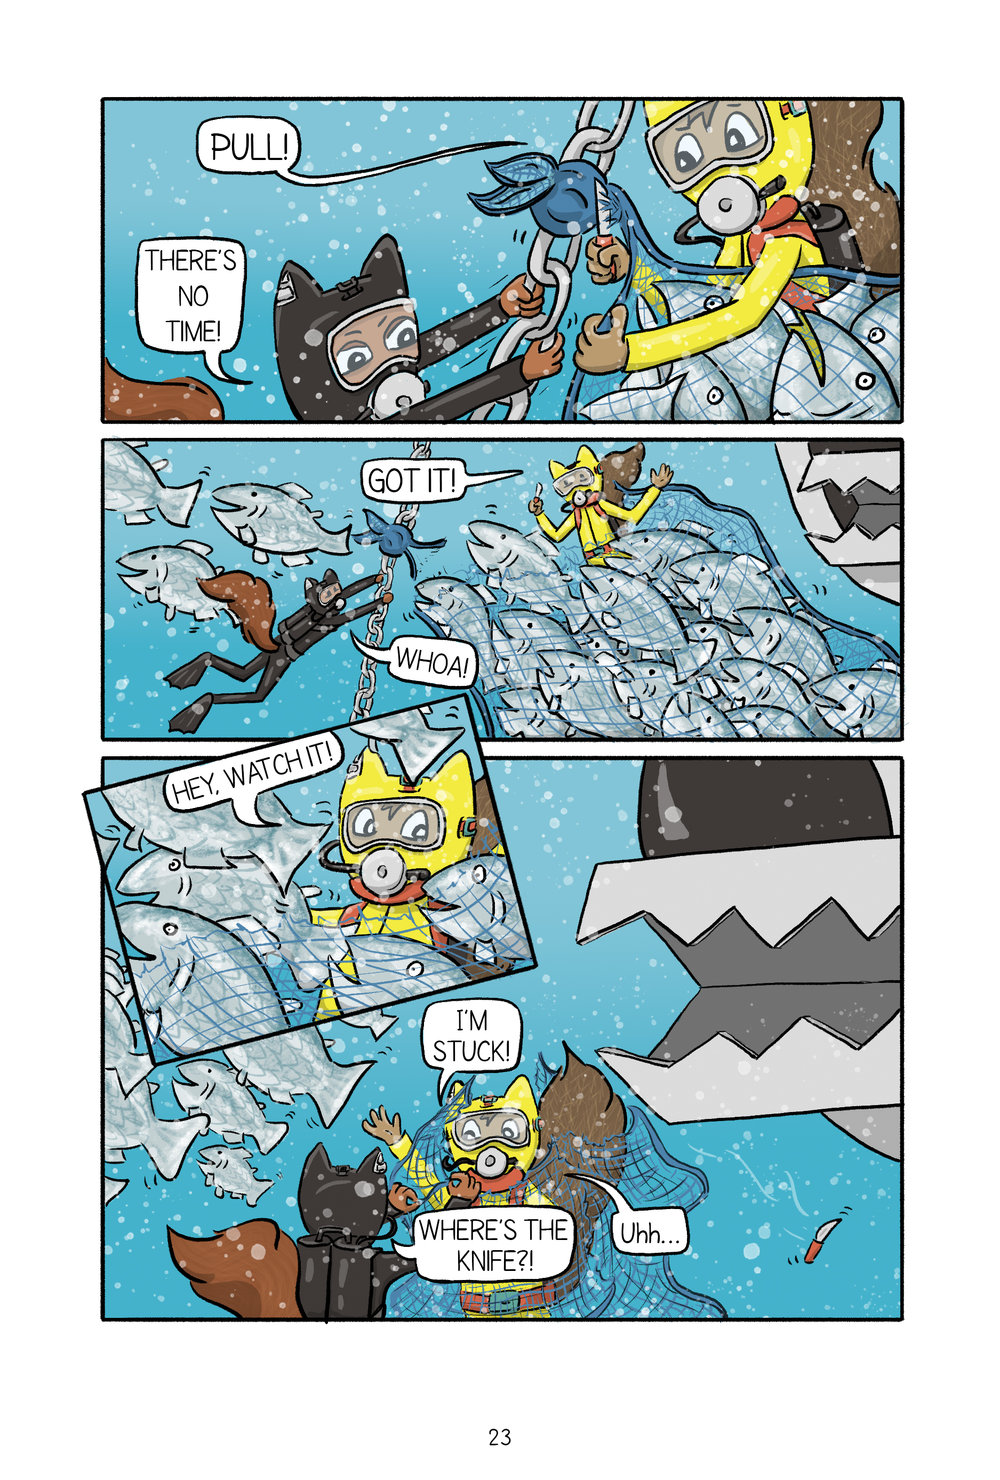 Page 23 Cognito cuts through the net, the fish are free, but he gets tangled in the net